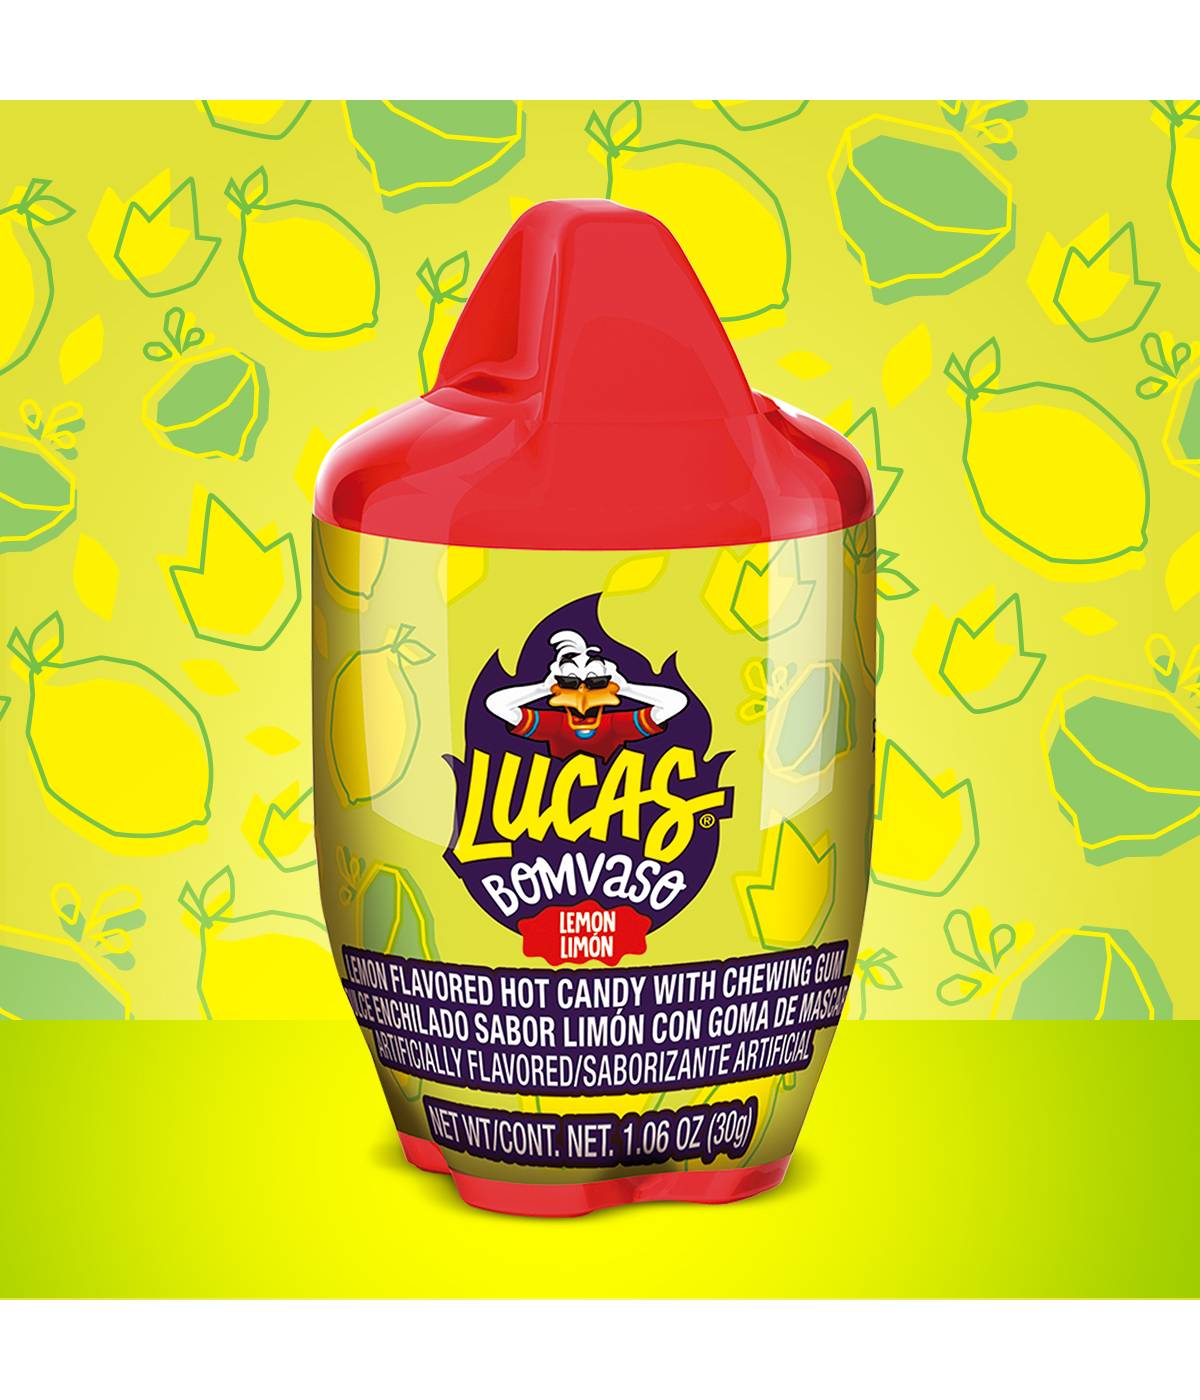 Lucas Bomvaso Lemon Candy with Chewing Gum; image 2 of 3